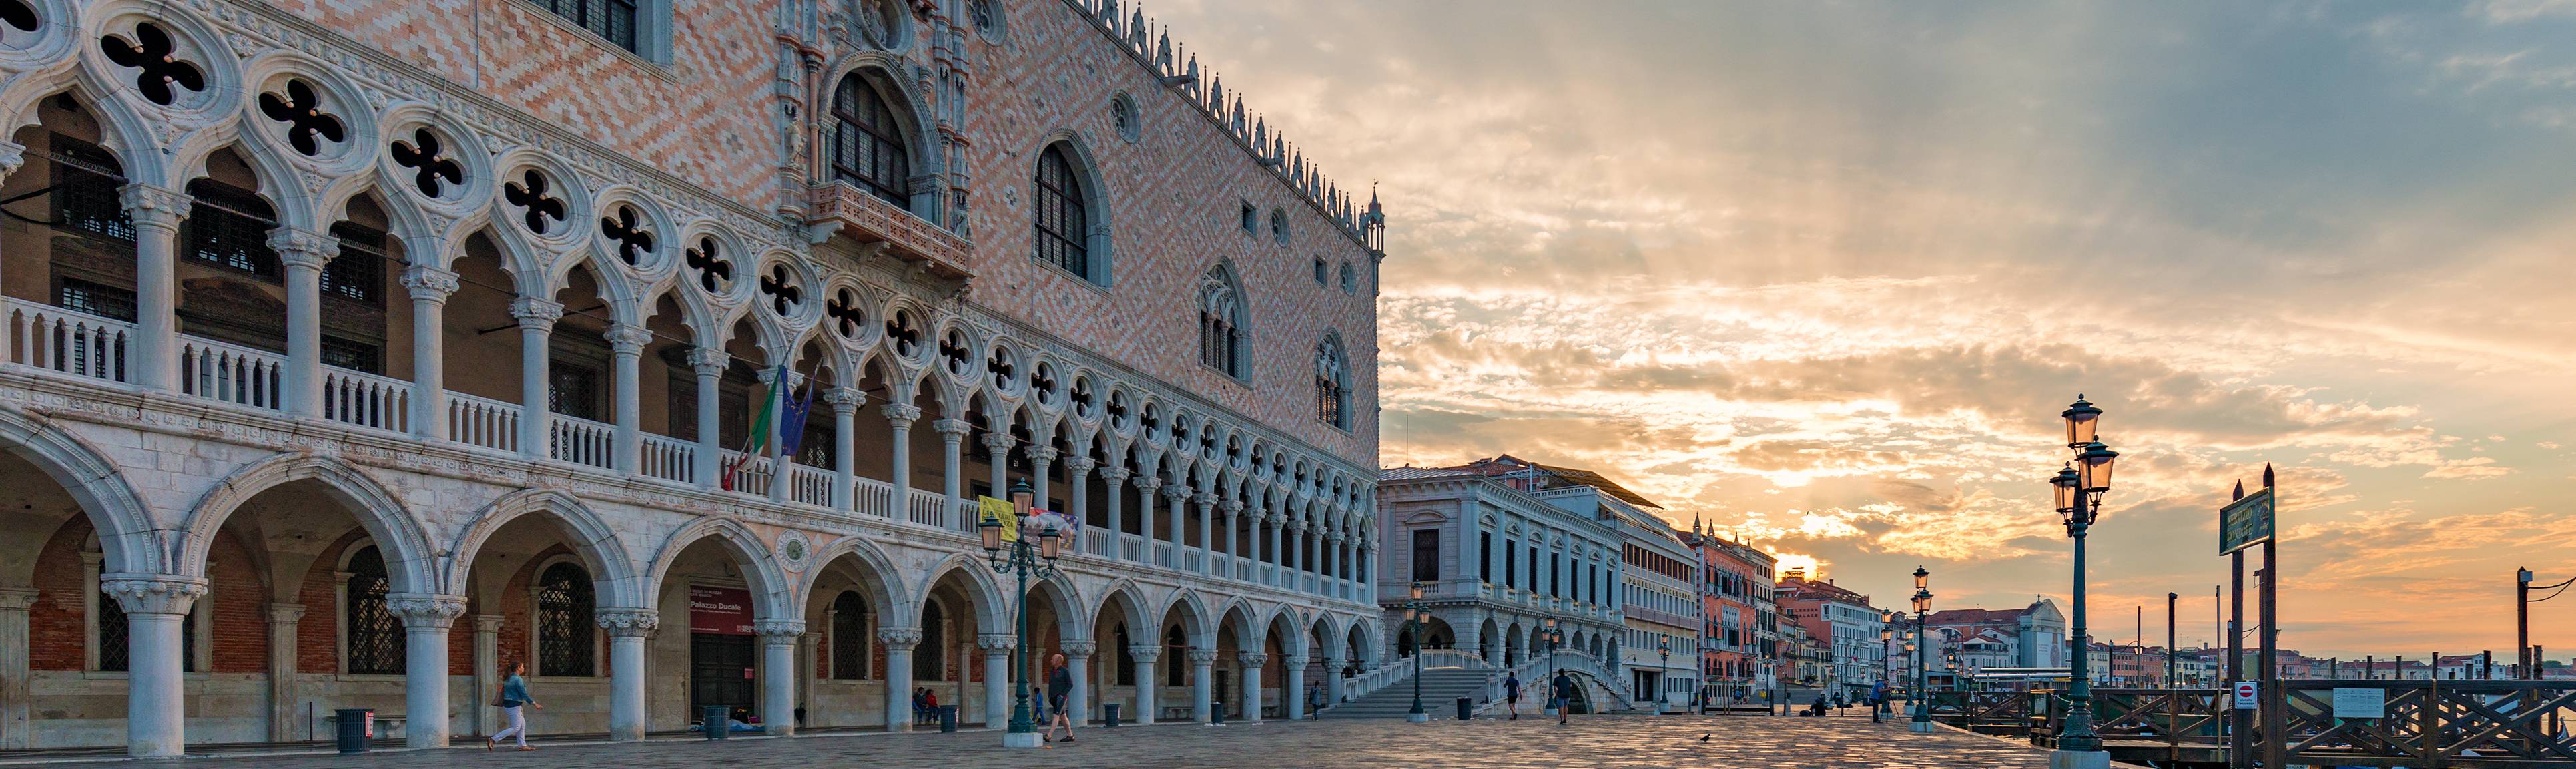 Sunset view of the arched building flanking Piazza San Marco in Venice